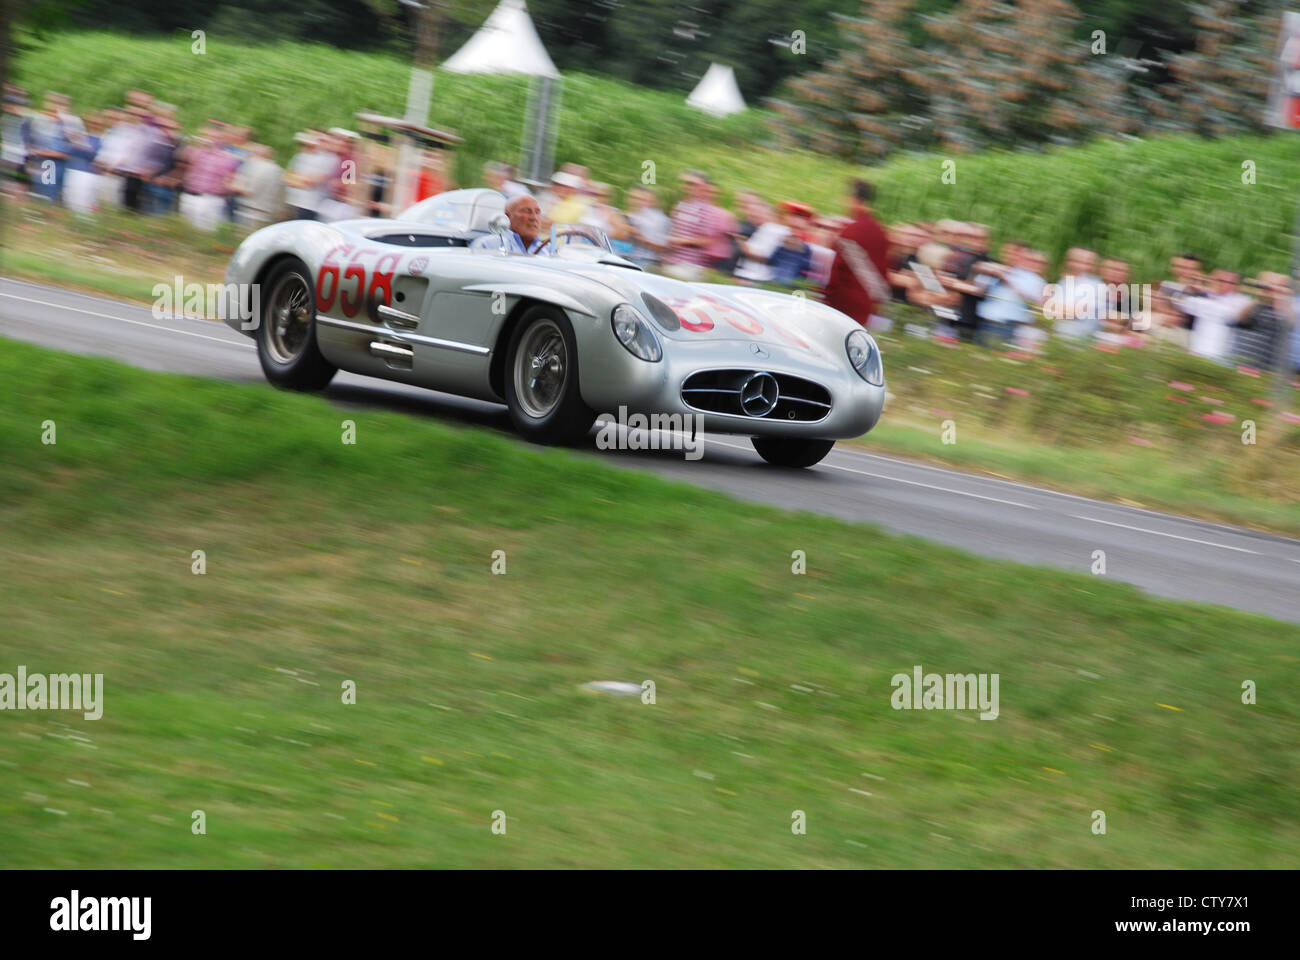 Stirling Moss in 1955 Mercedes-Benz 300 SLR at Classic Days 2012, Schloss Dyck Germany Stock Photo